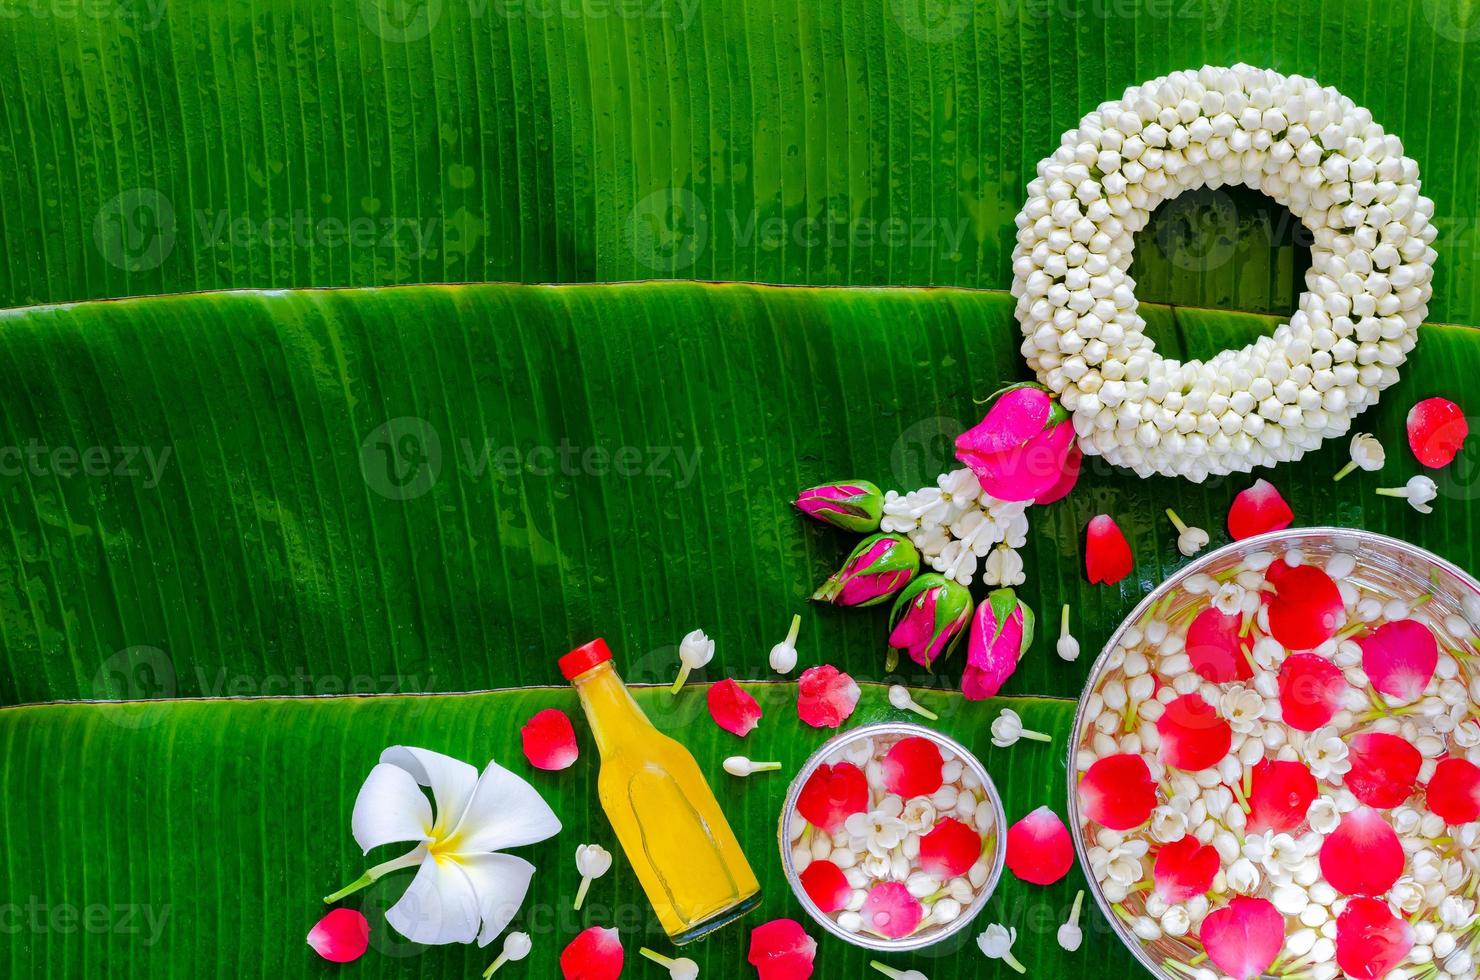 Songkran festival background with jasmine garland, flowers in water bowls and scented water for blessing on wet banana leaf background. photo